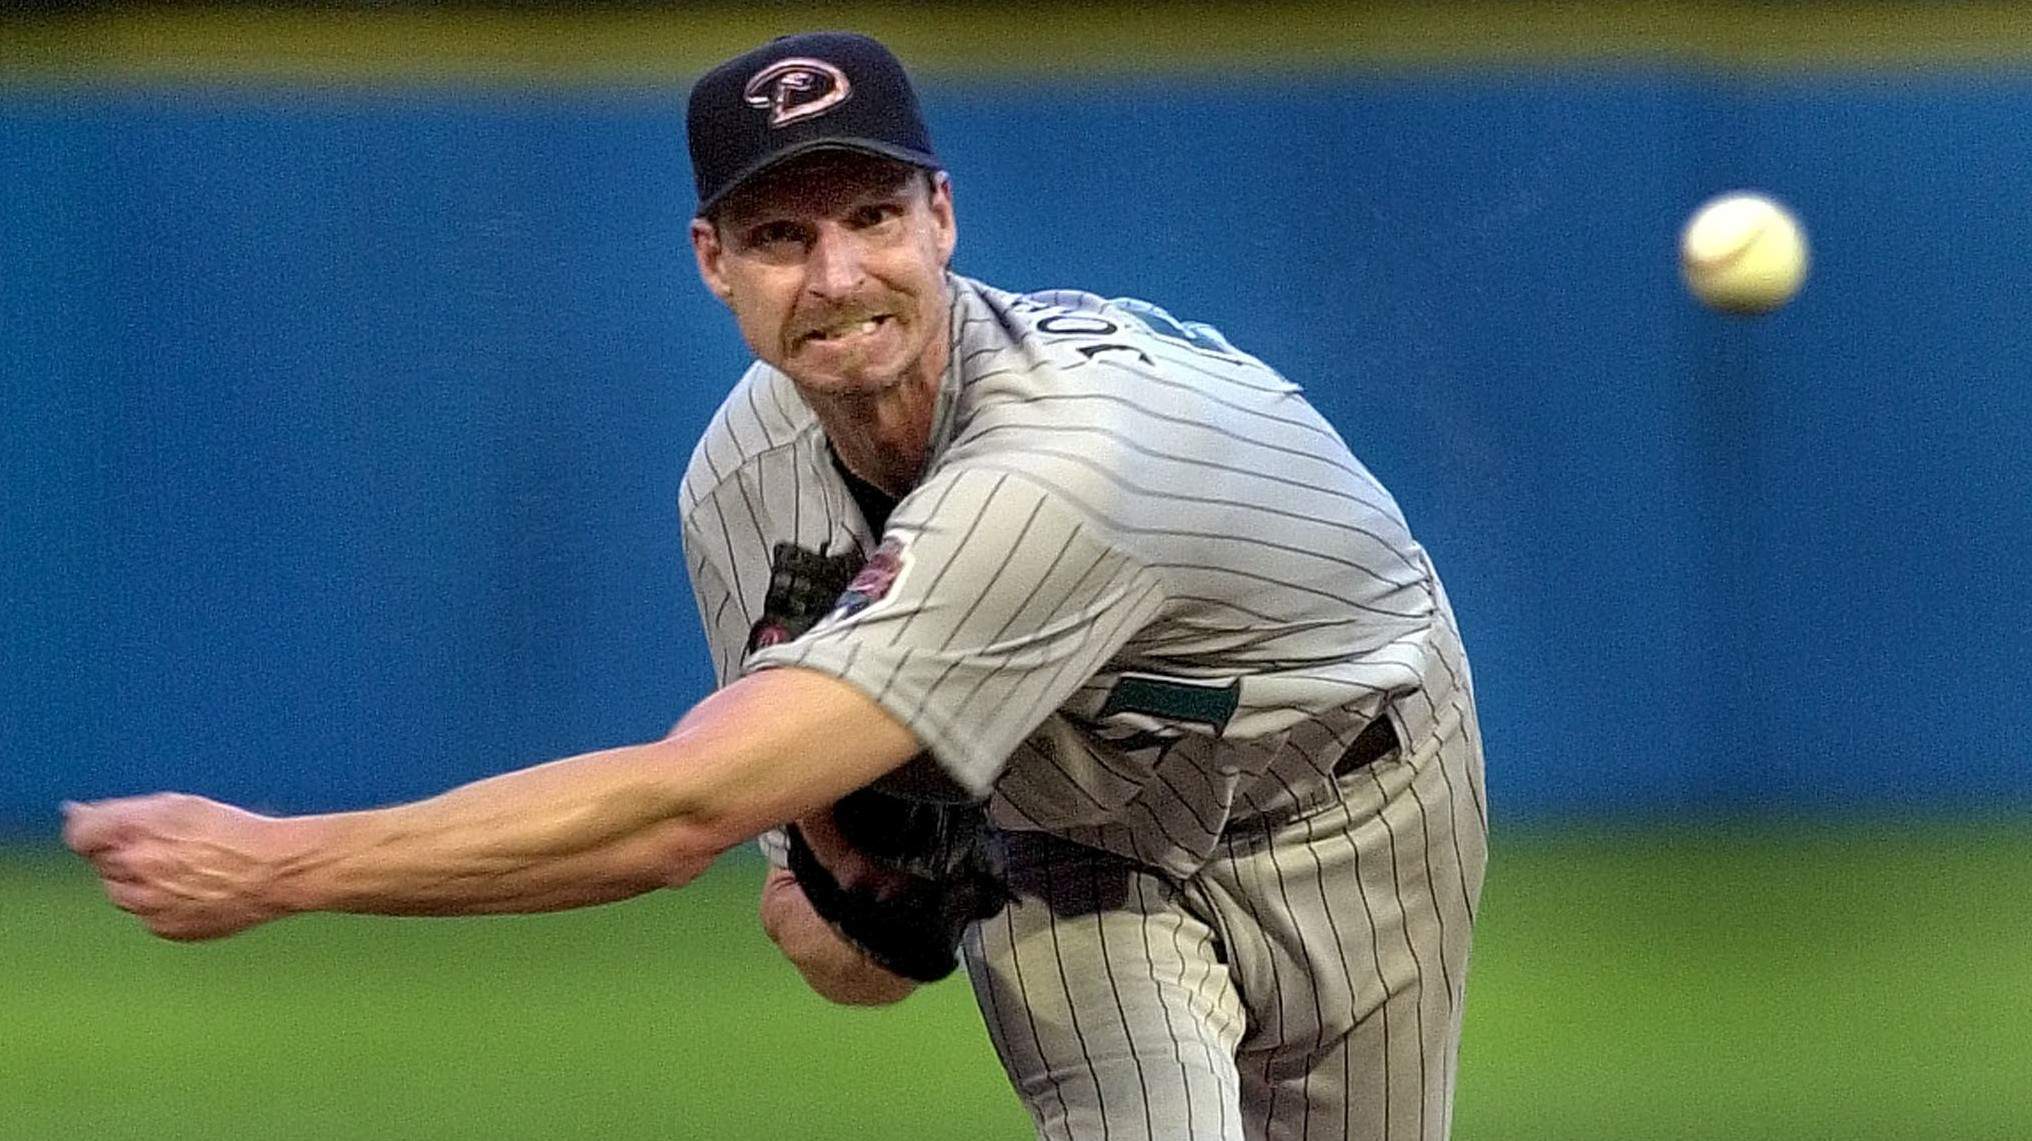 Randy Johnson From Dedeaux Field to a World Series MVP